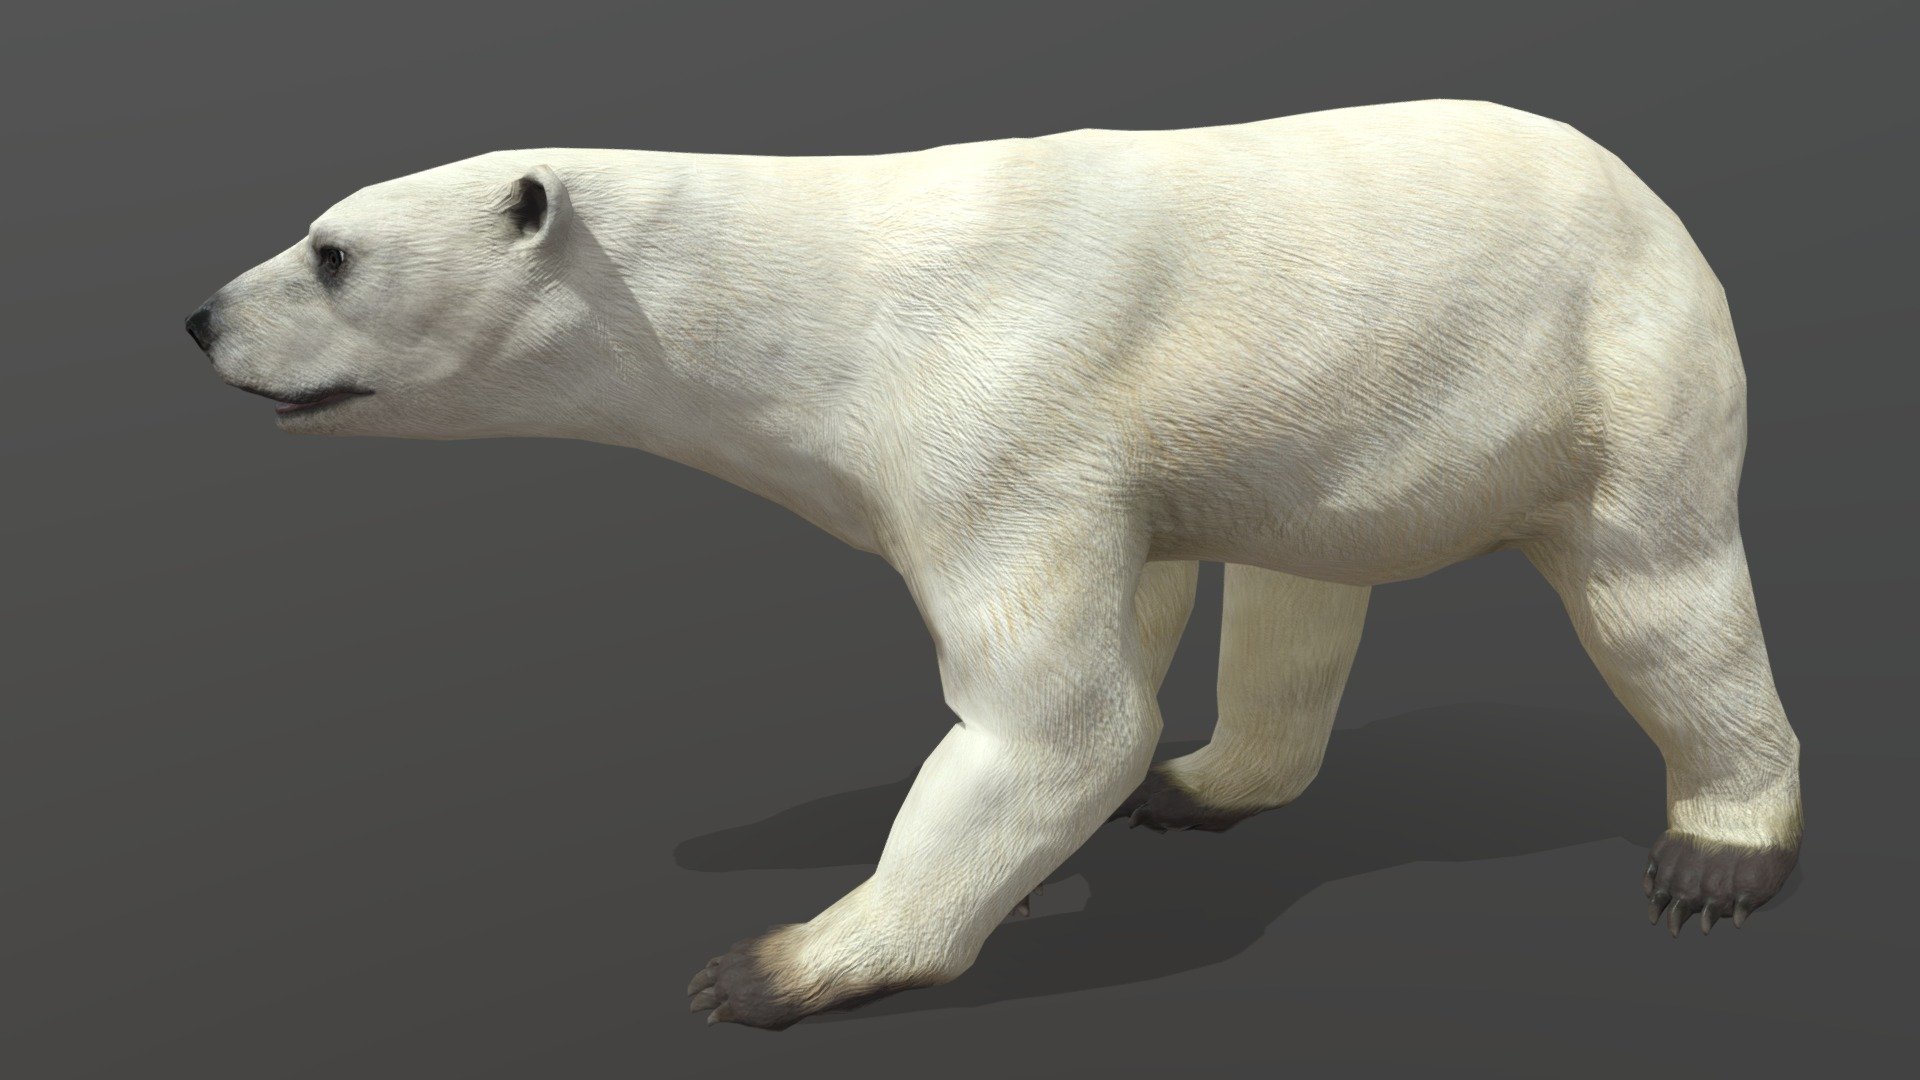 Modeled, rigged and animated in 3dmax from scratch.
All textures were made in Substance Painter.

Animation is idle01，idle02，idle03，walk，run，eat - Polar bear - 3D model by DIO (@dioiiiii2) 3d model